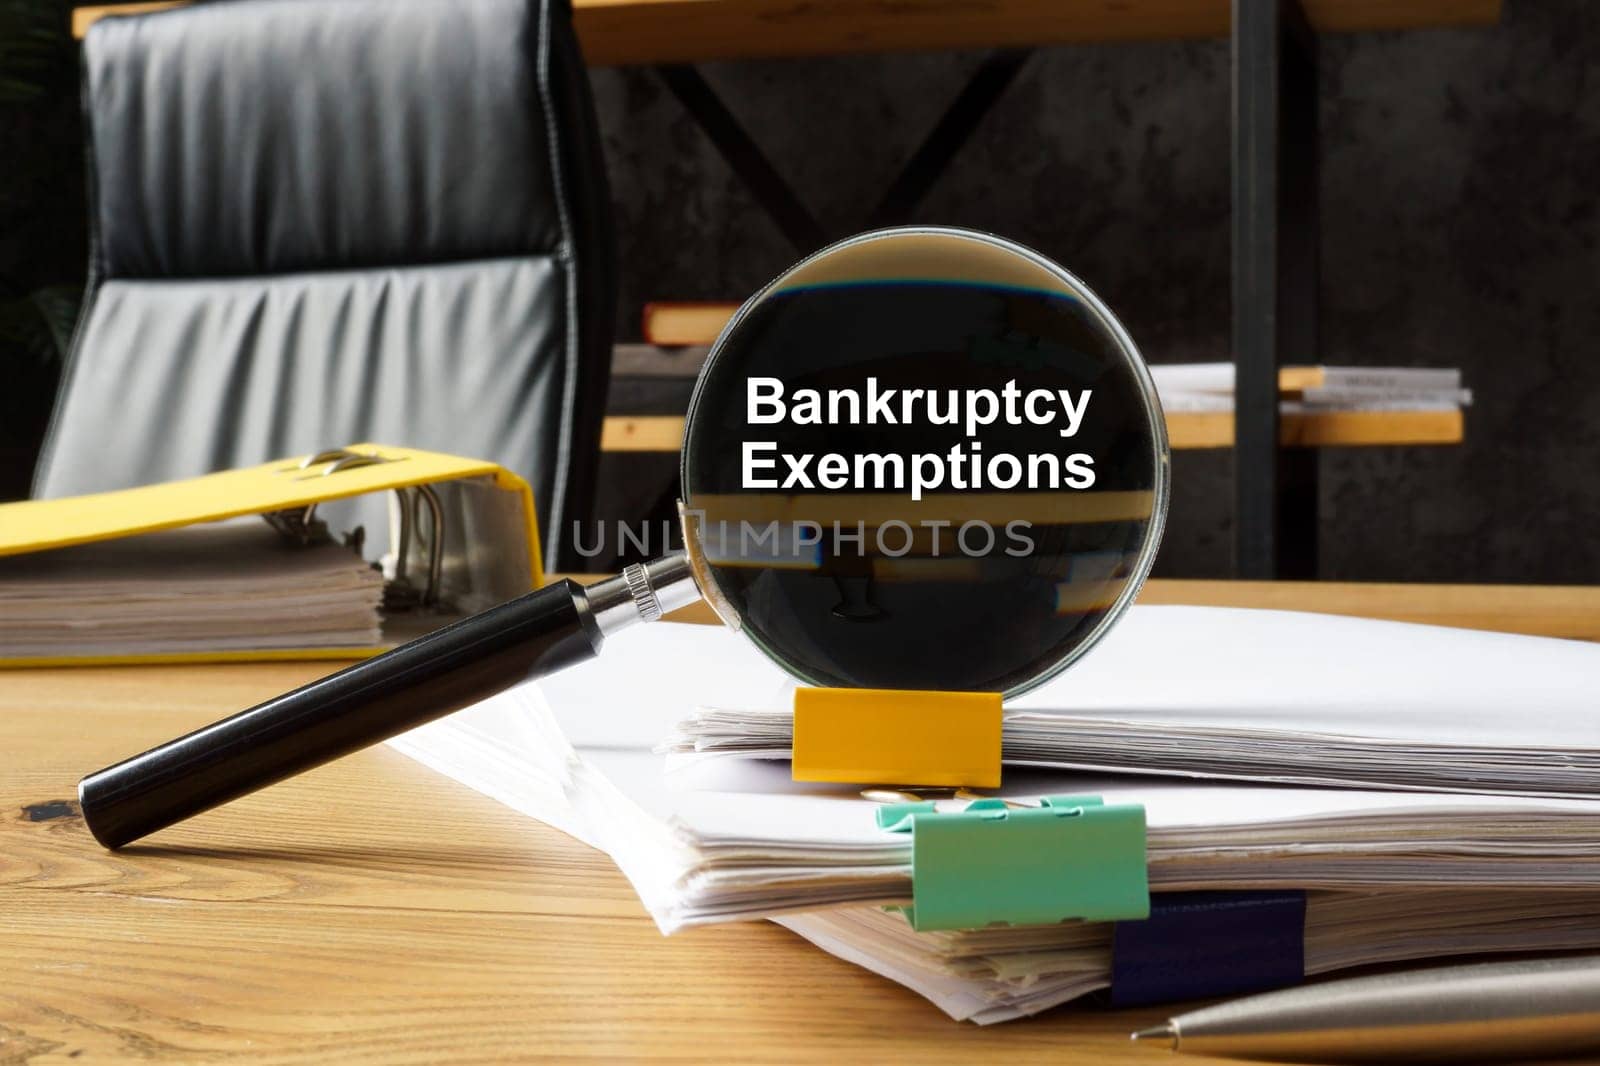 Bankruptcy exemptions concept. Magnifying glass lies on a stack of papers.